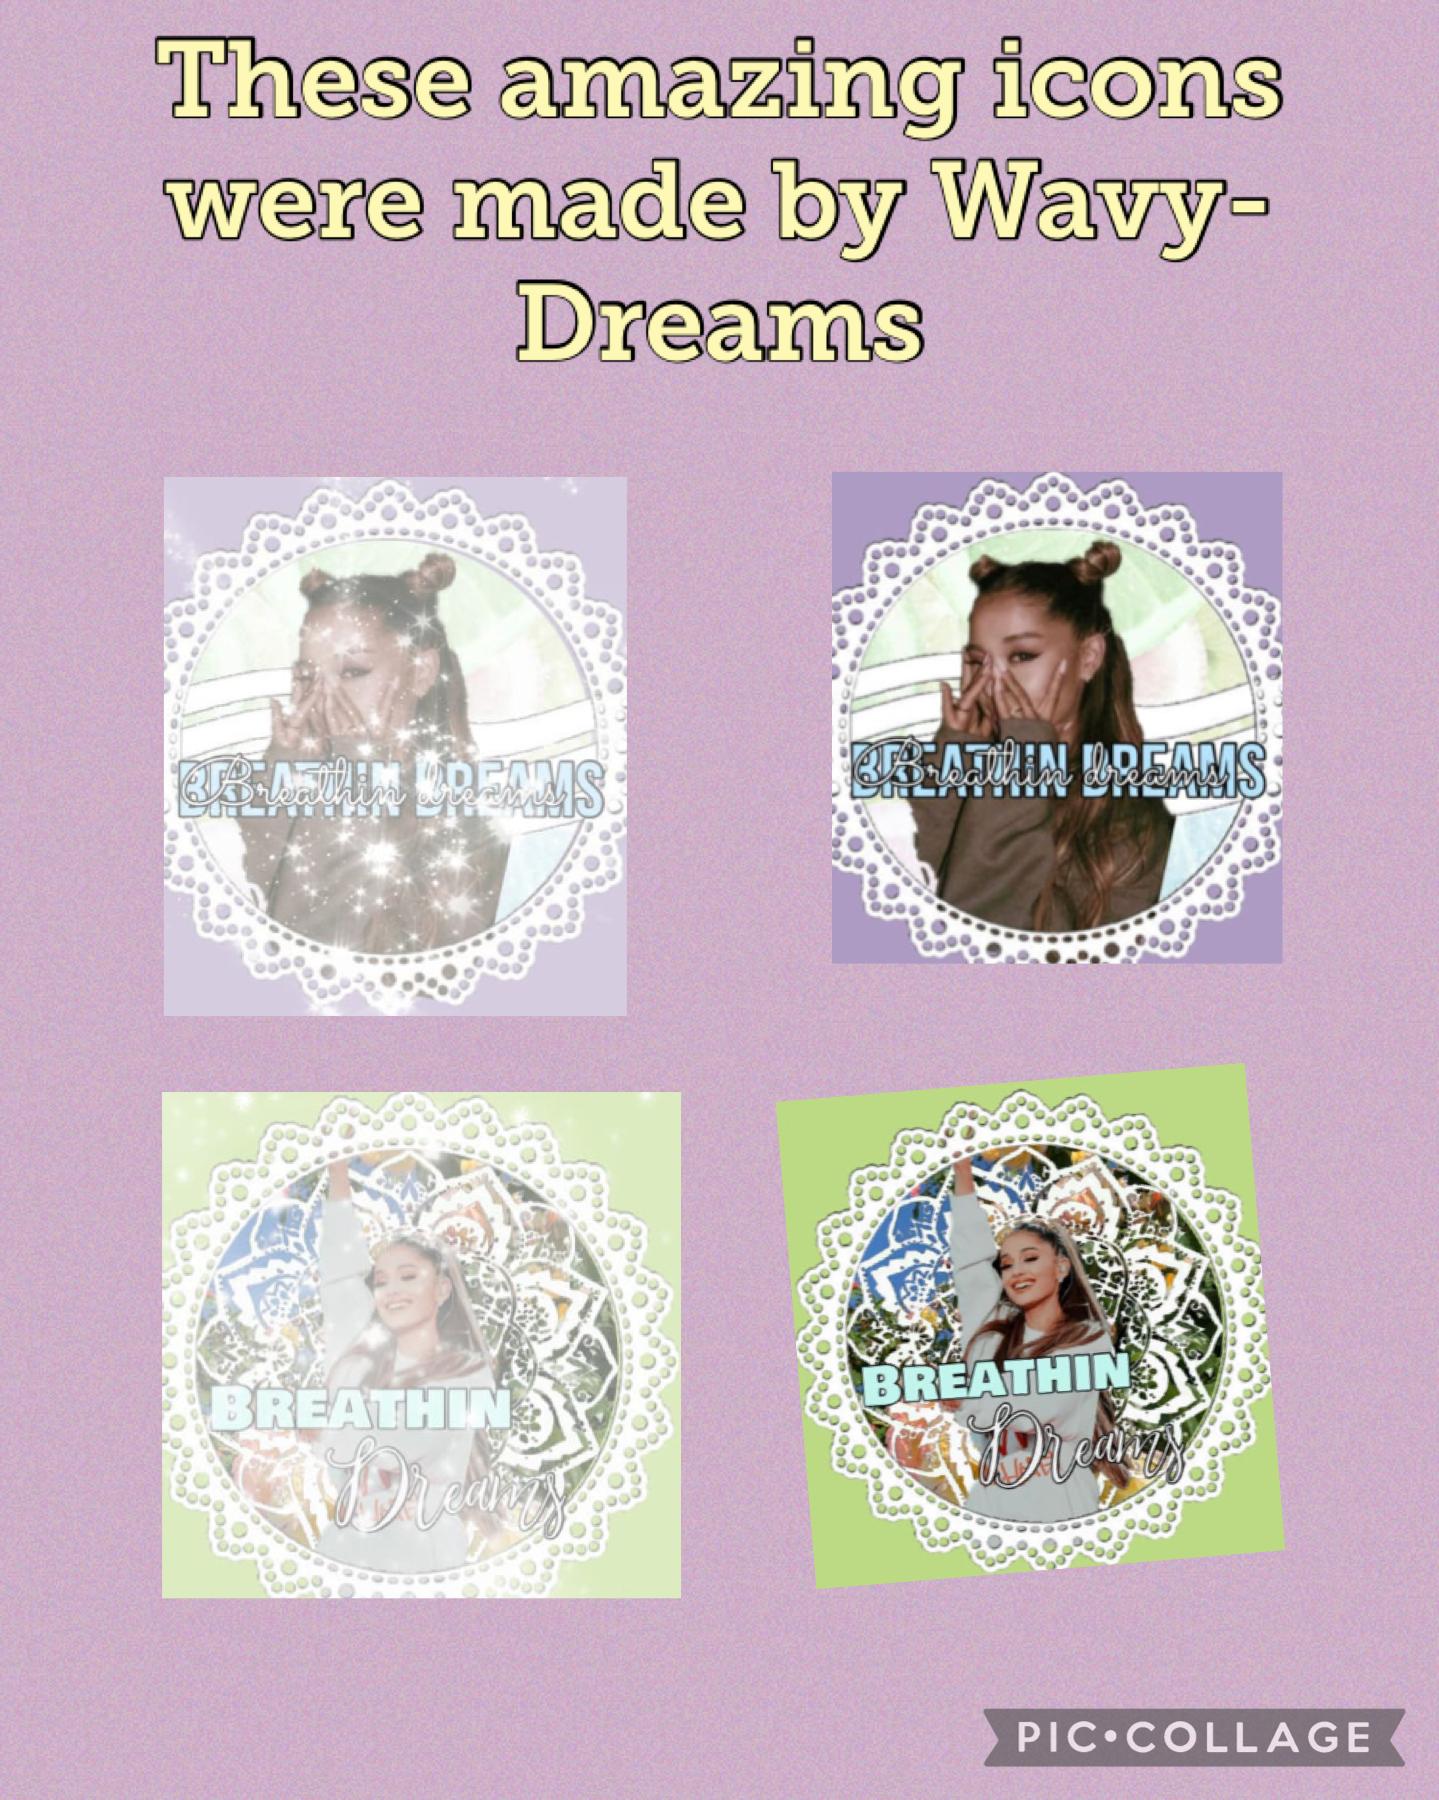 20.8.22 These amazing icons were made by wavy-dreams